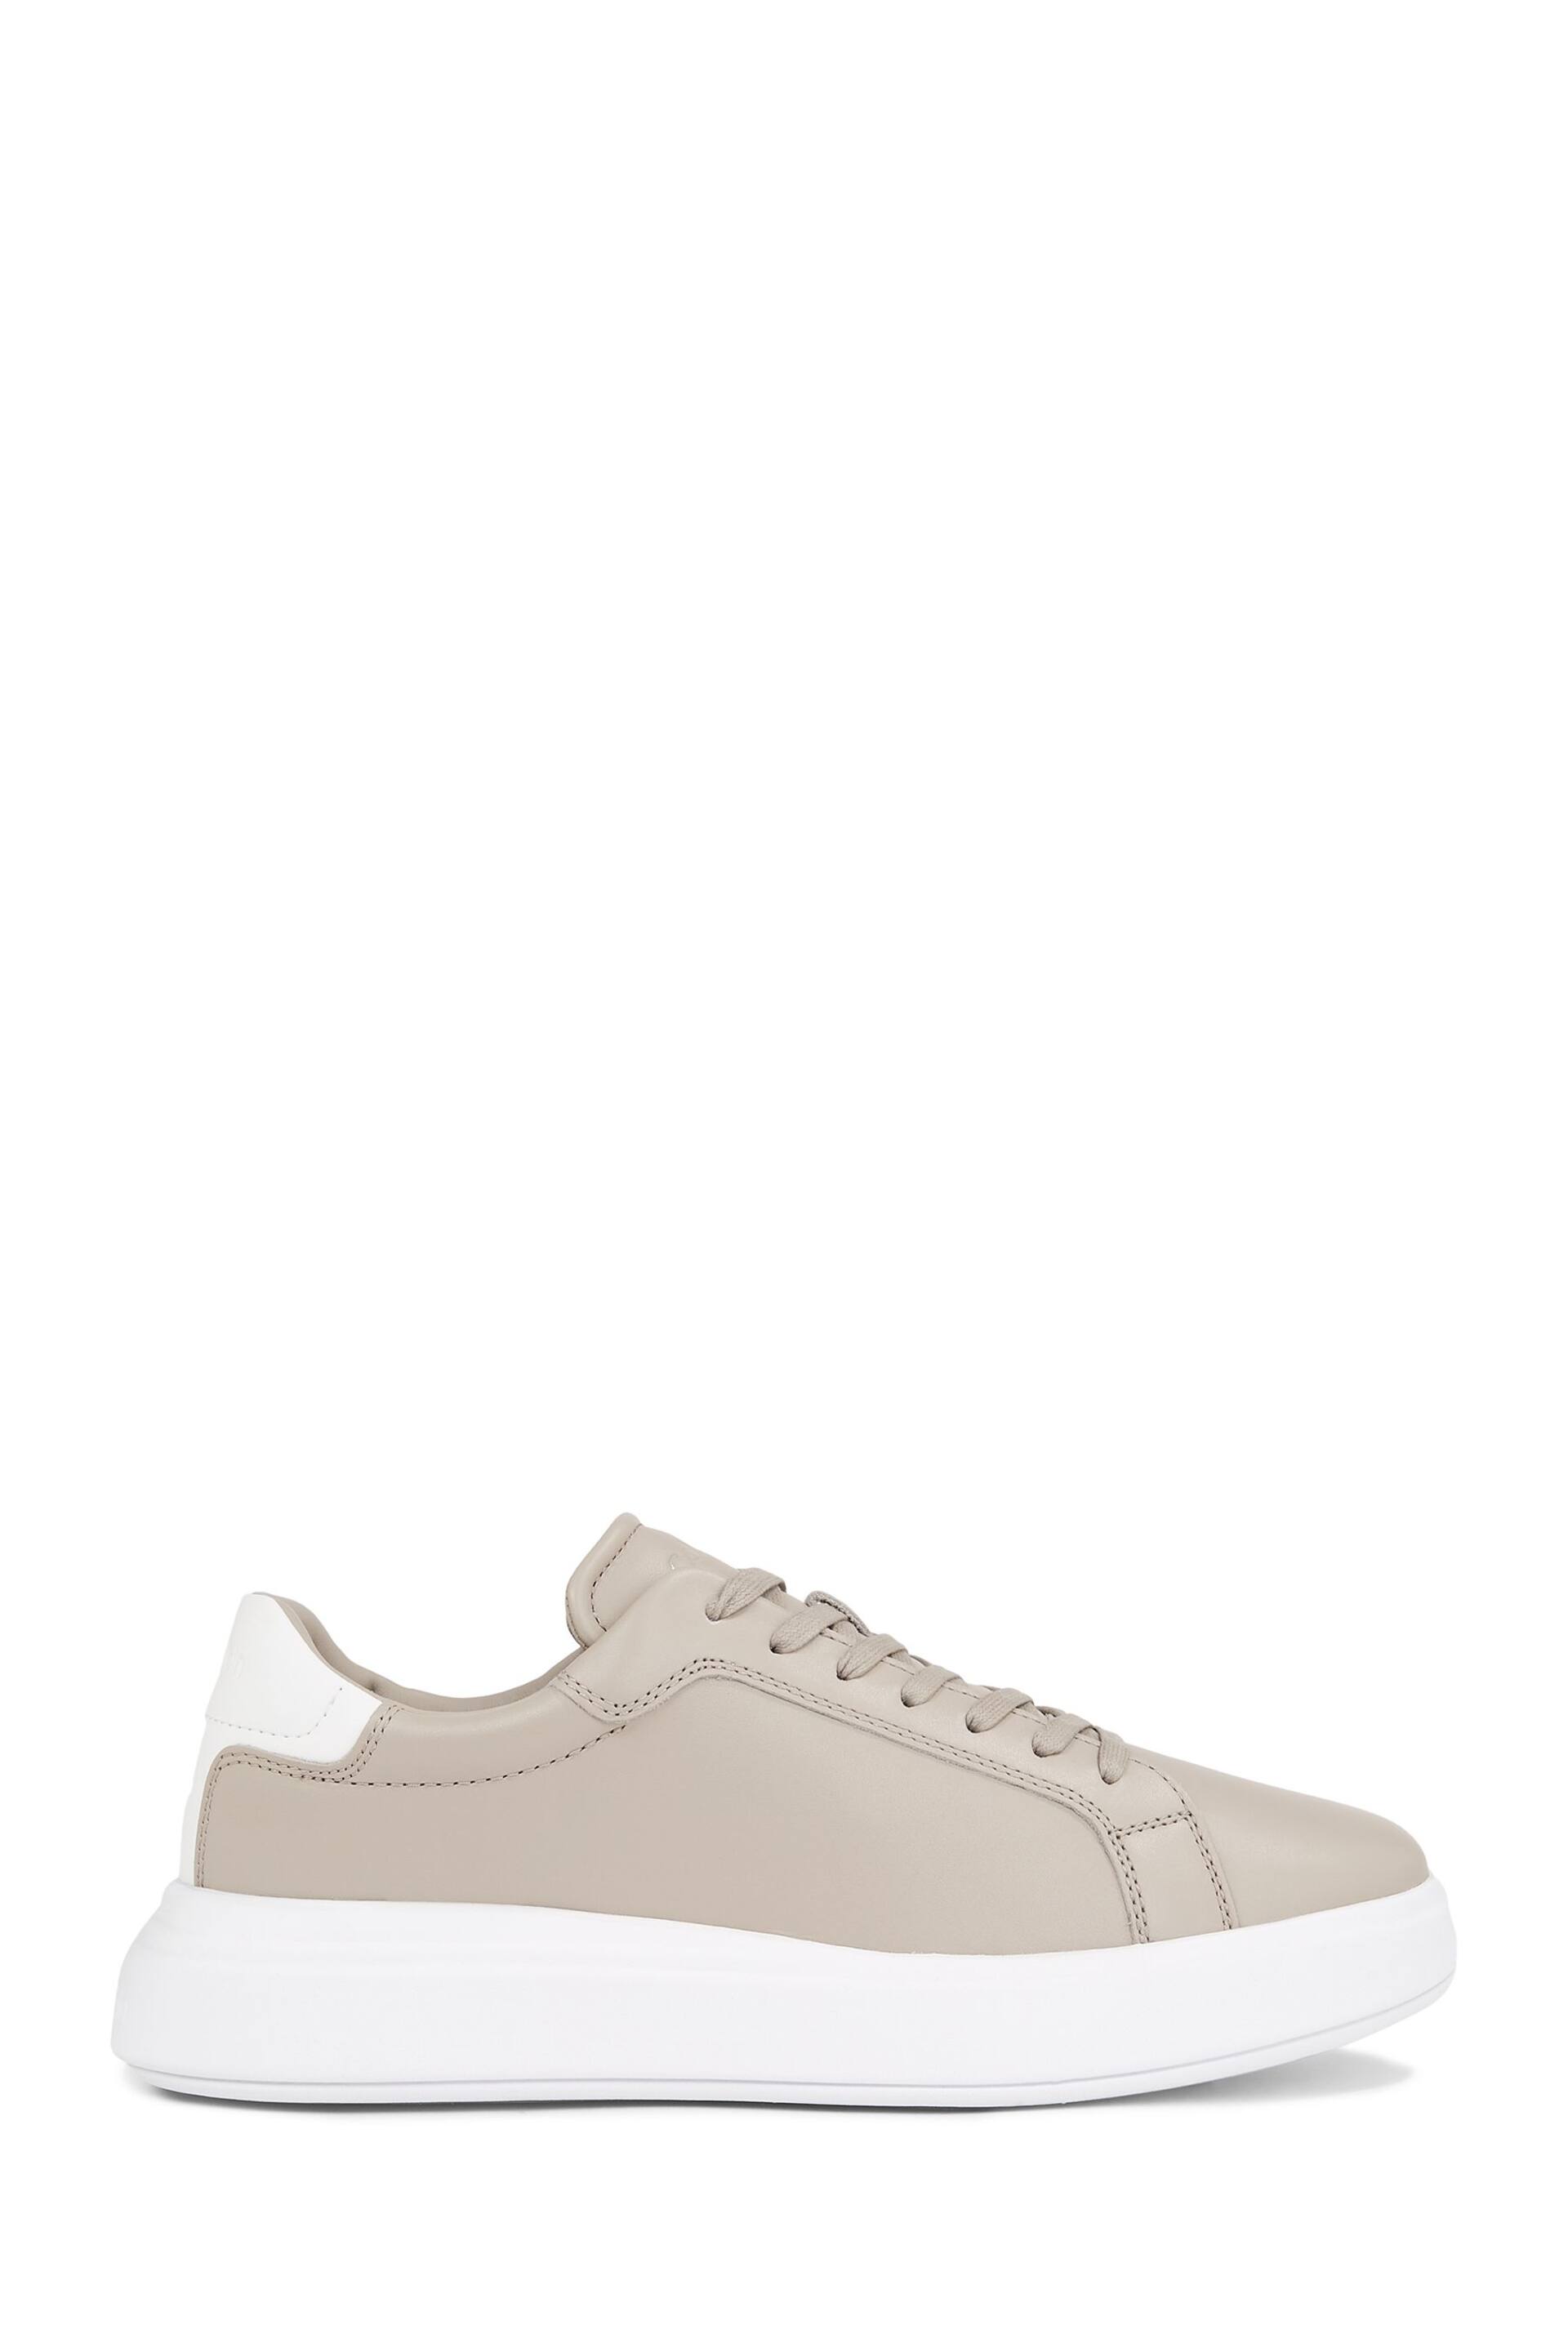 Calvin Klein Nude Low Top Lace-Up Sneakers - Image 3 of 4